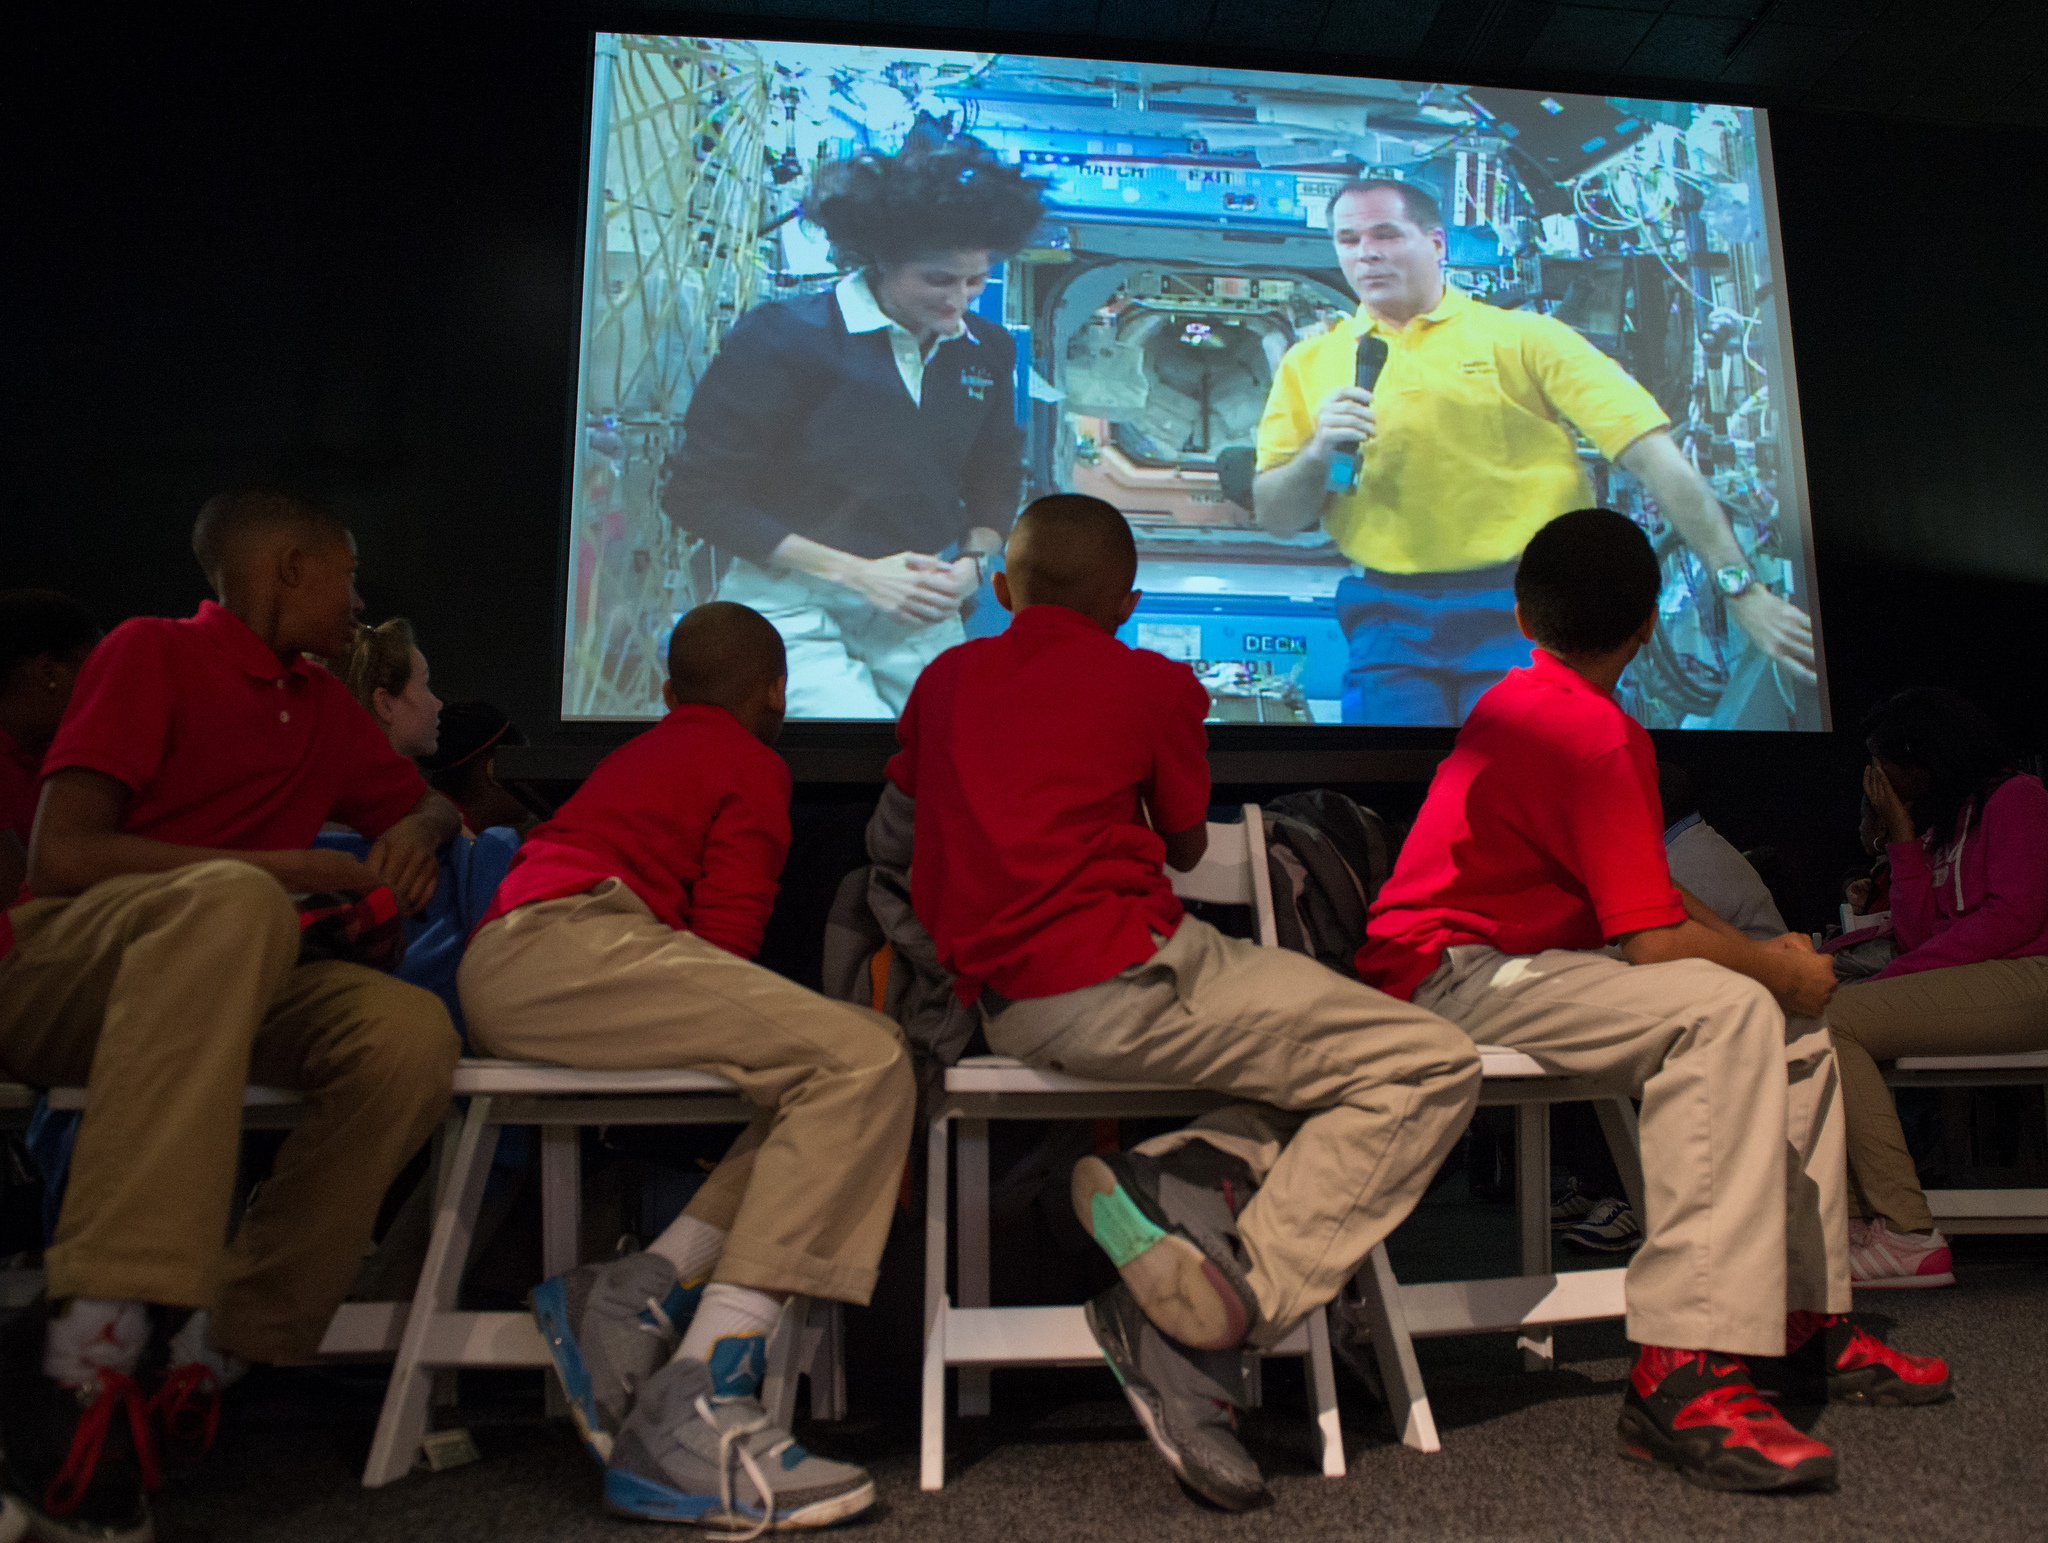 International Space Station Expedition 33 crew (on screen) answers questions from students during a downlink event